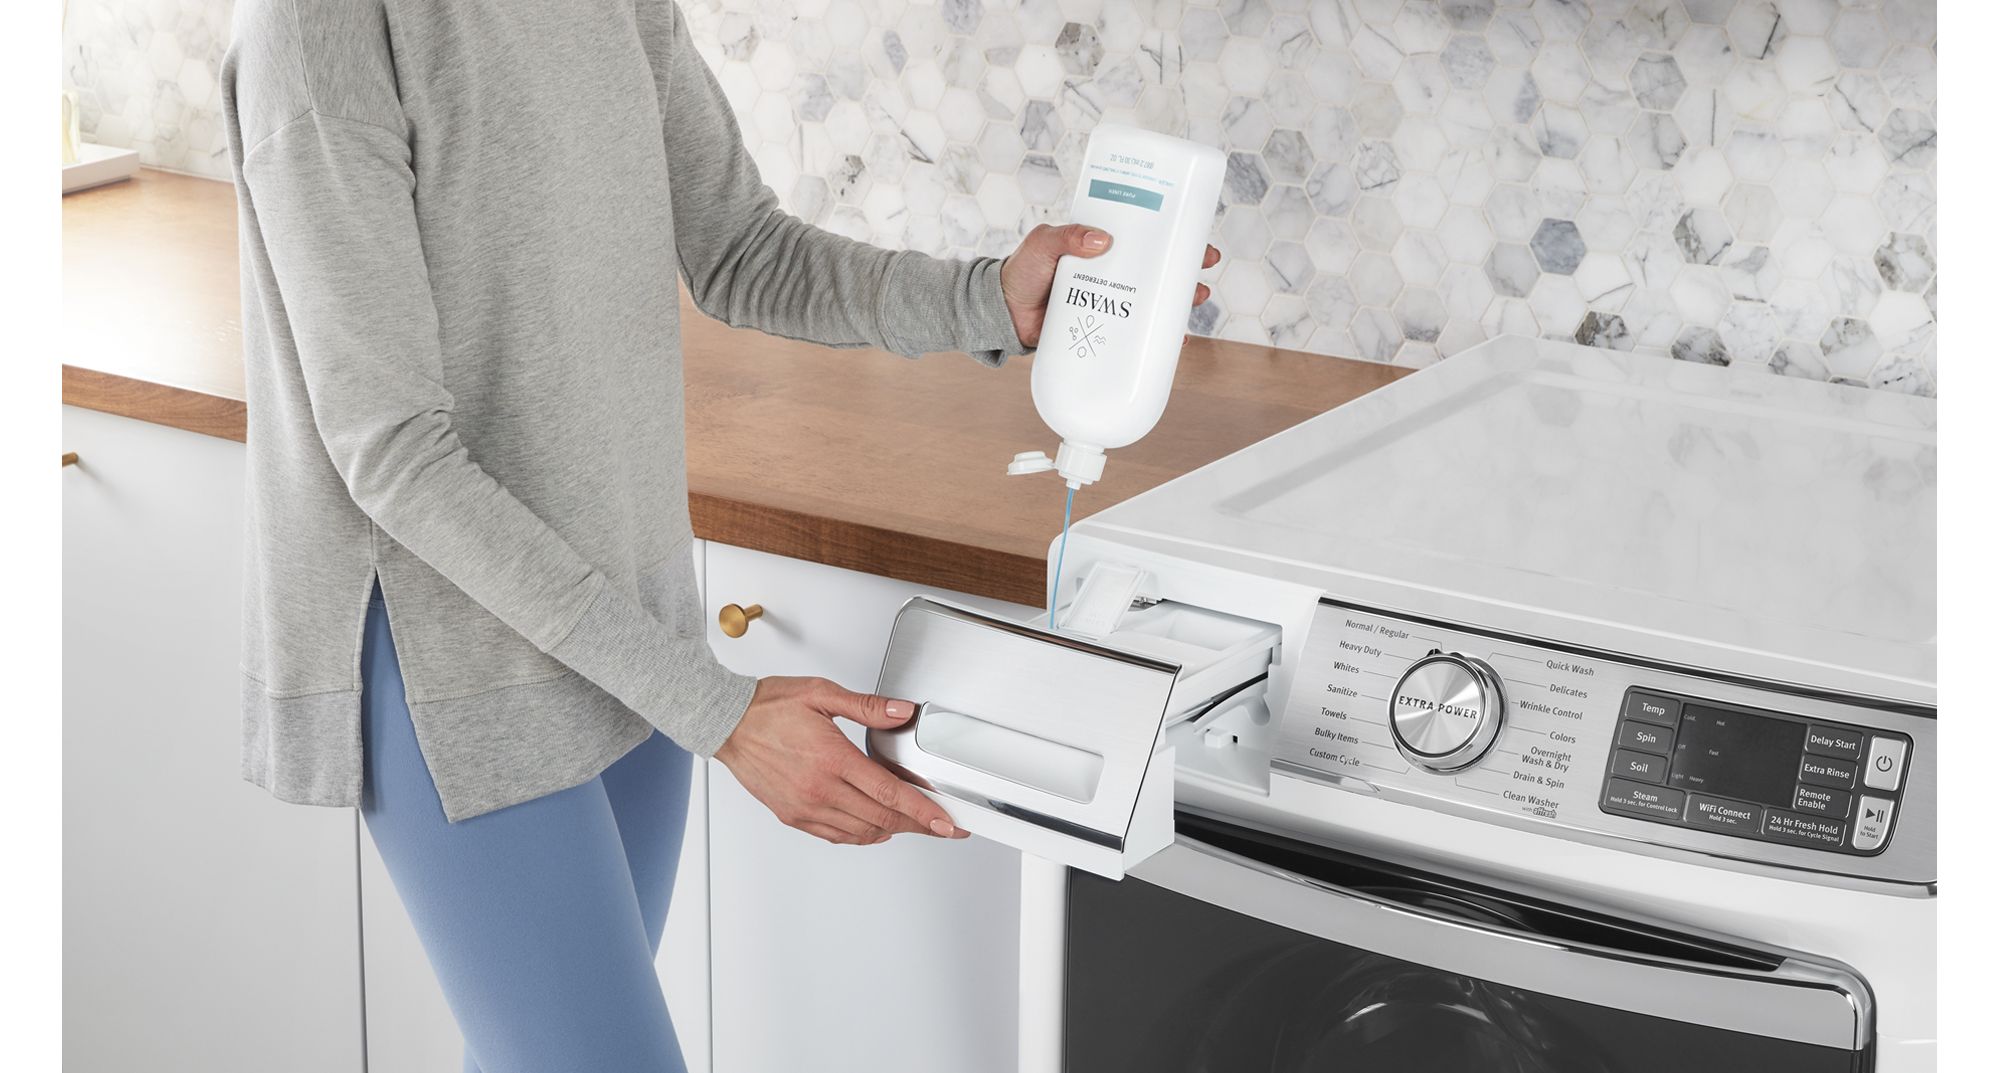 A person pours Swash detergent into the dispenser of a front load washing machine.